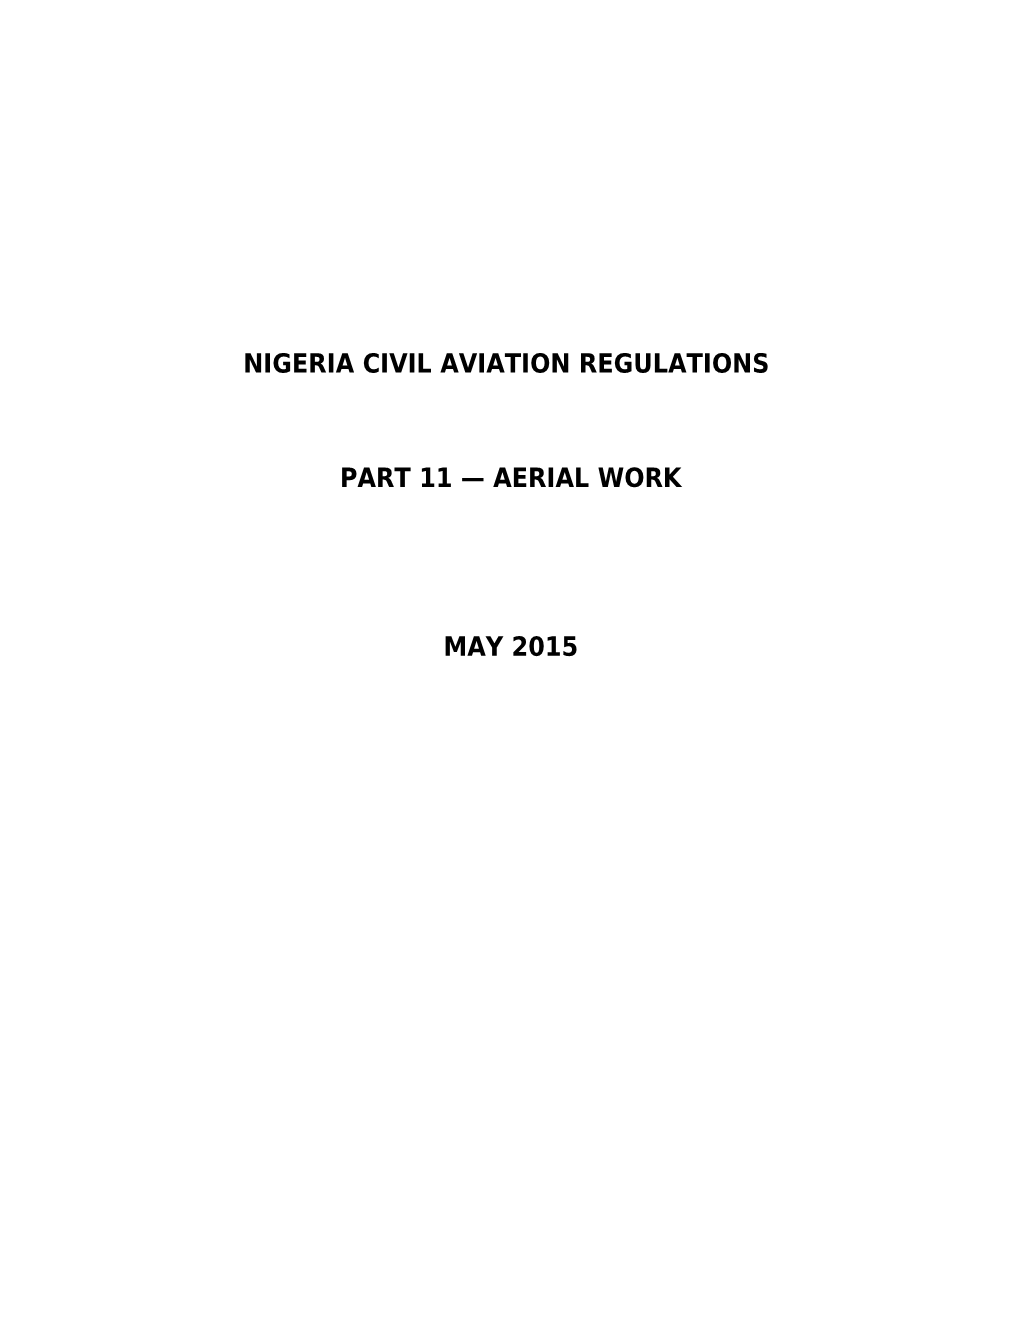 Civil Aviation Safety Act